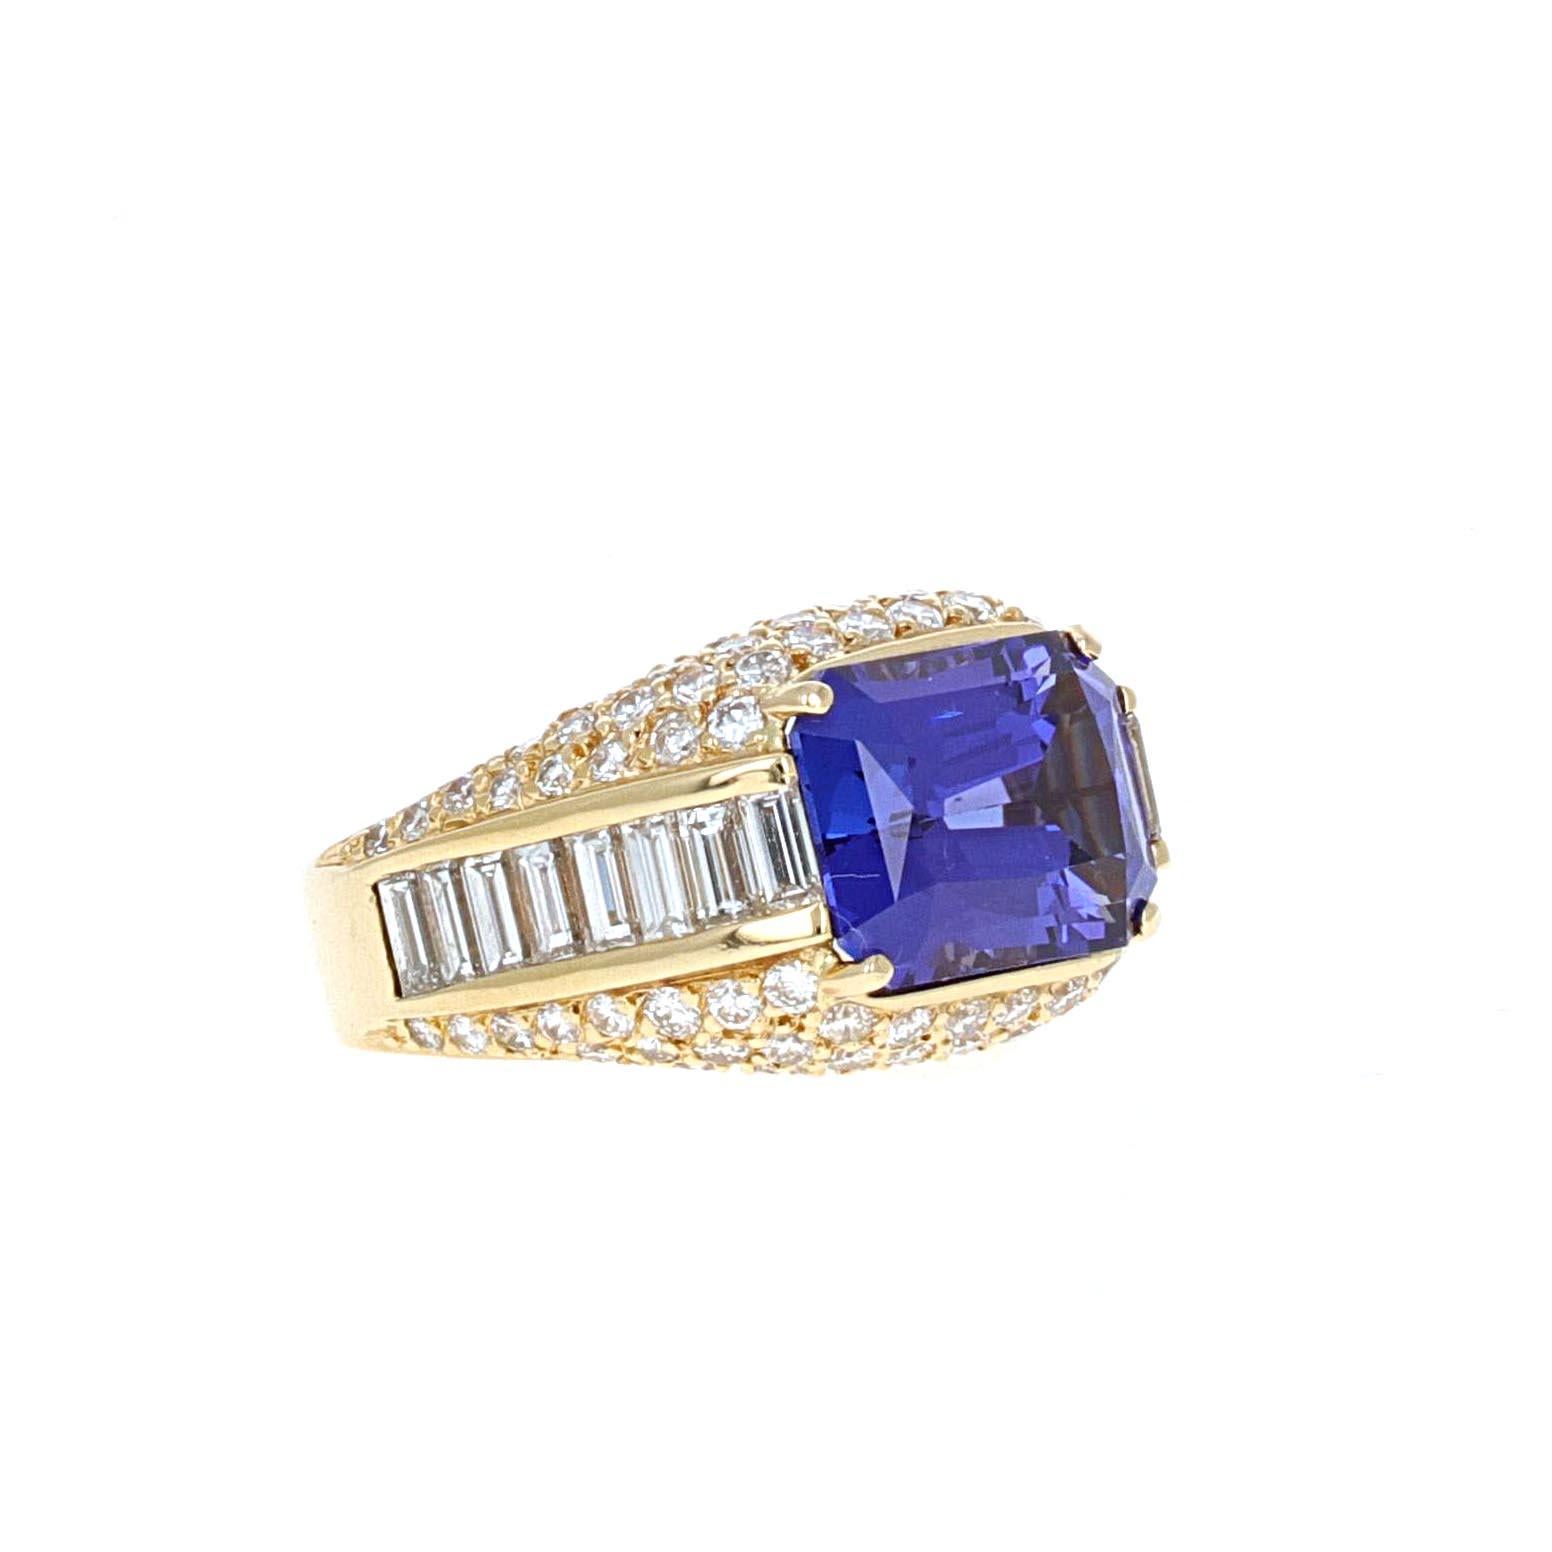 This 8.47 carat emerald cut tanzanite is set east-west giving it a trendy yet unique look. The tanzanite is set in an 18 karat yellow gold ring. The attention to detail makes this eyecatching mounting one-of-a-kind. Steming from the center gem are a